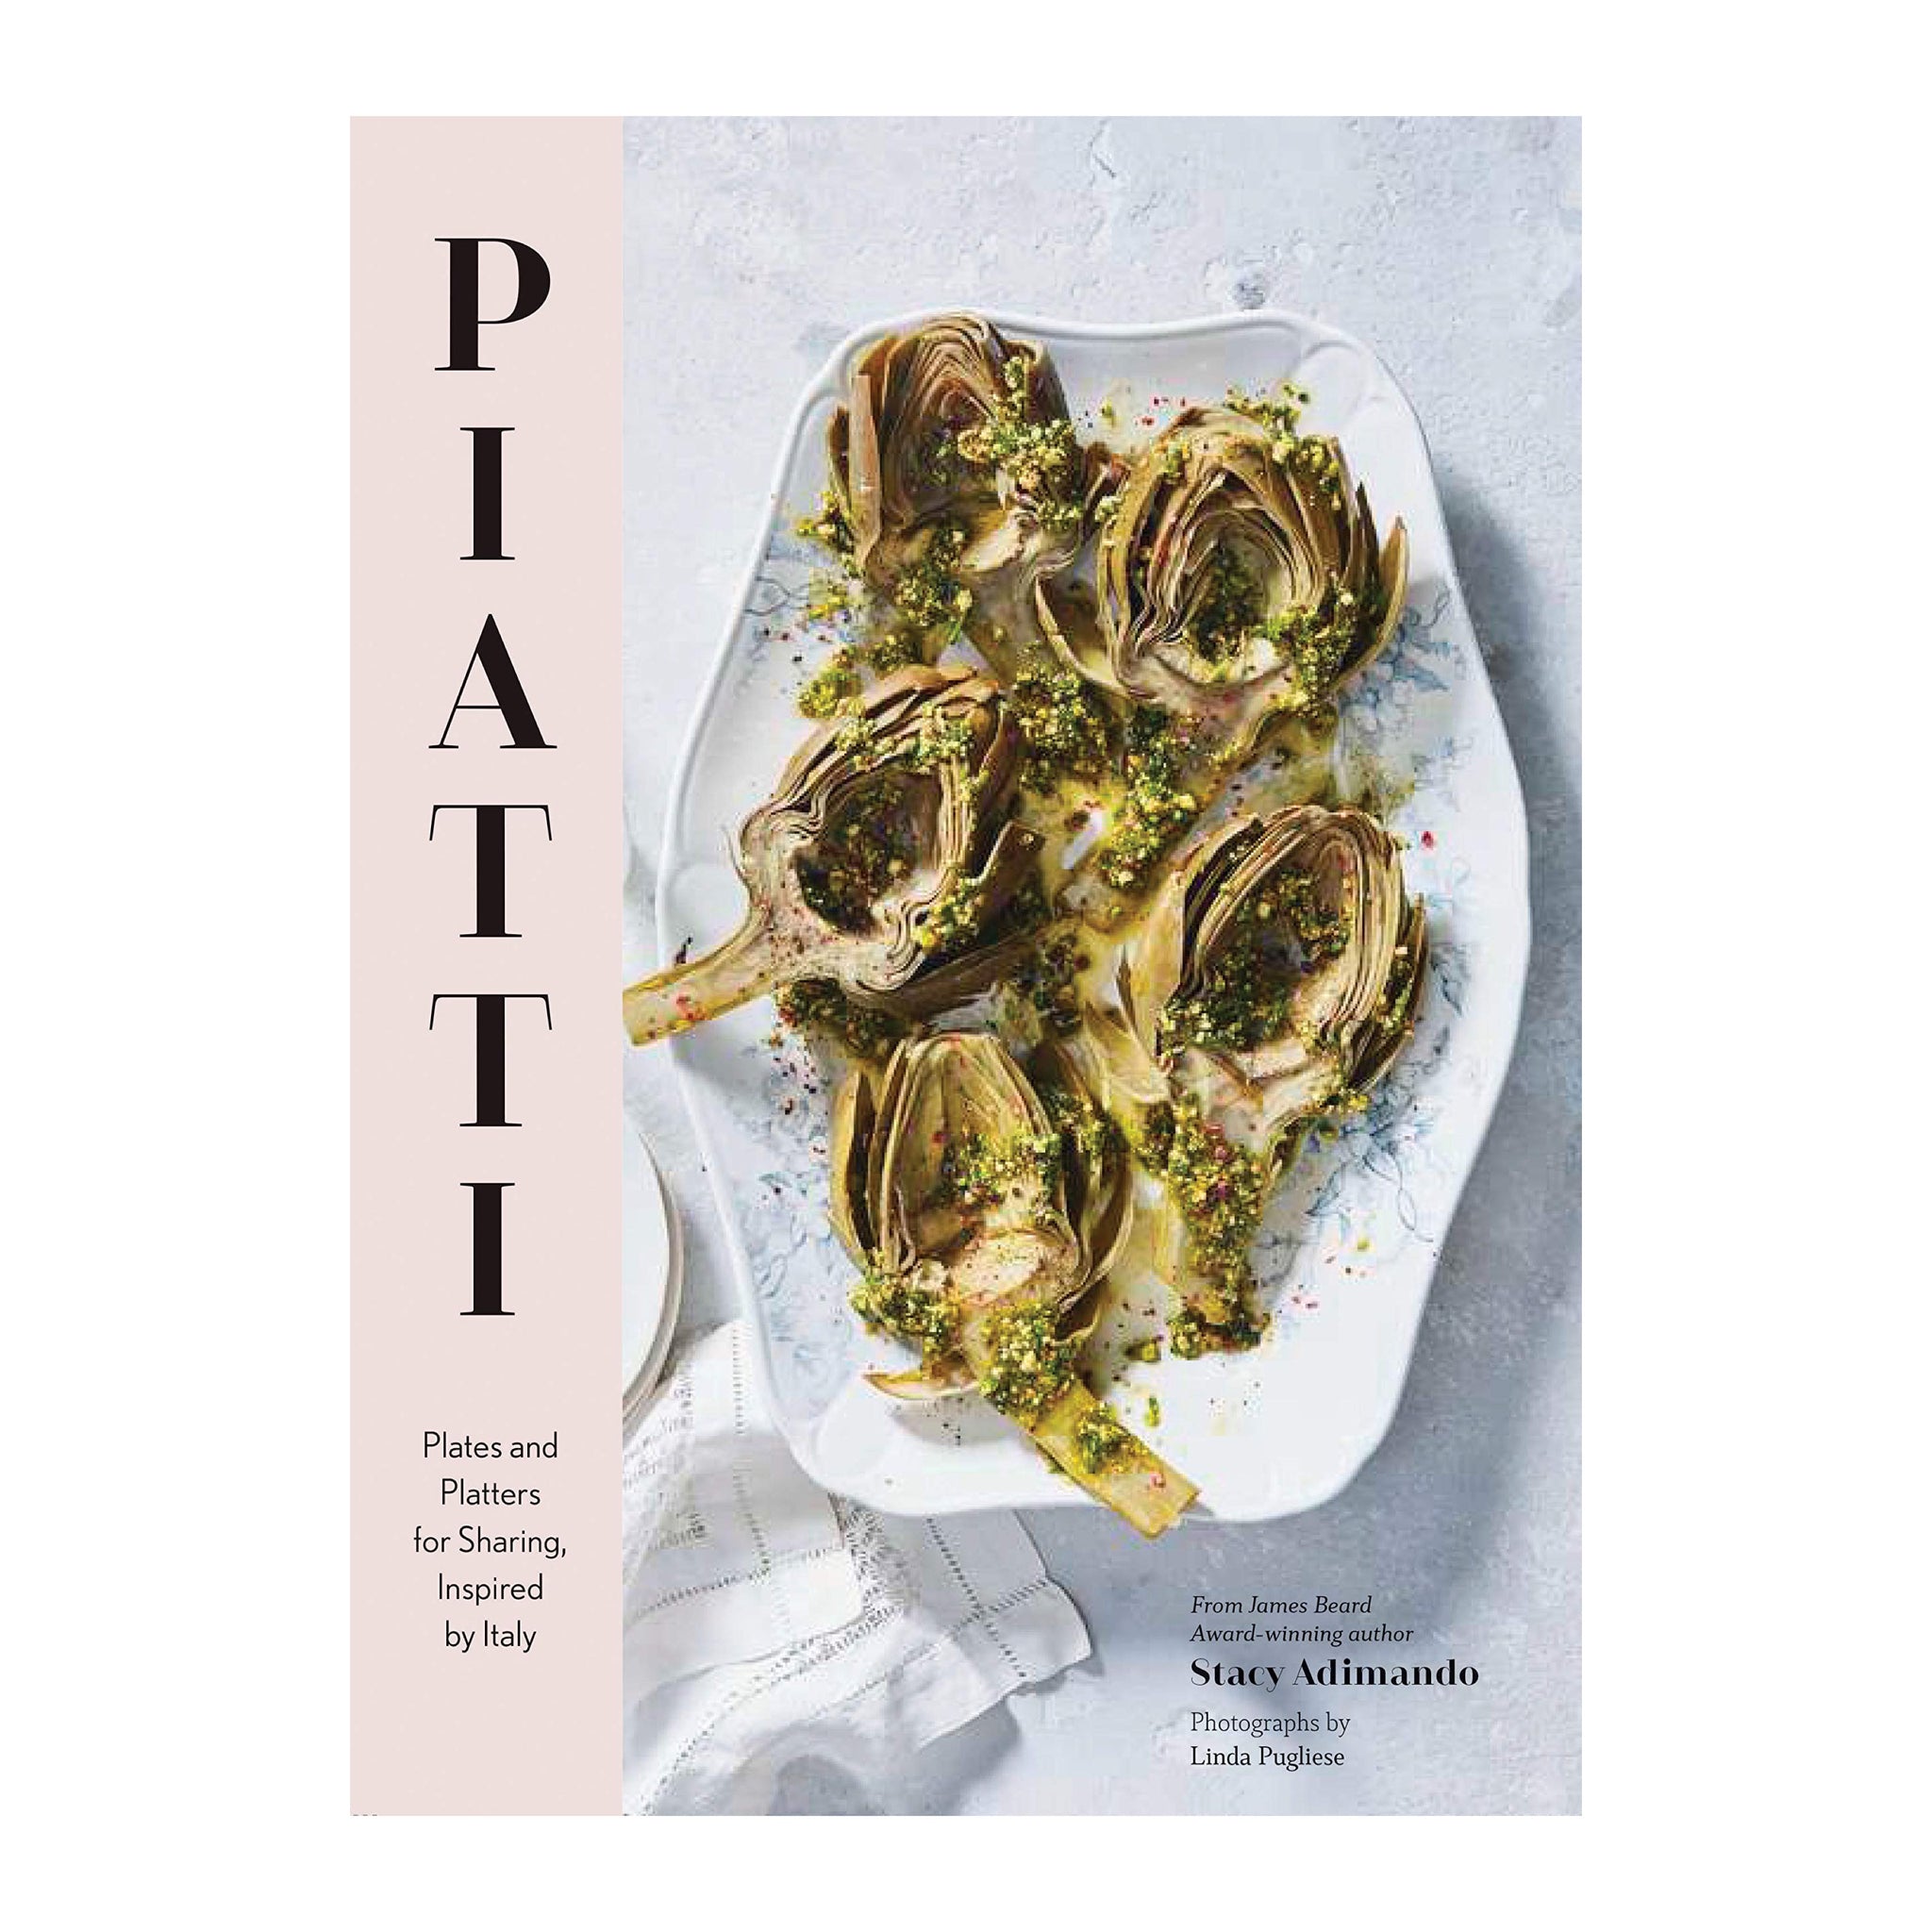 Piatti: Plates and Platters for Sharing, Inspired by Italy Book